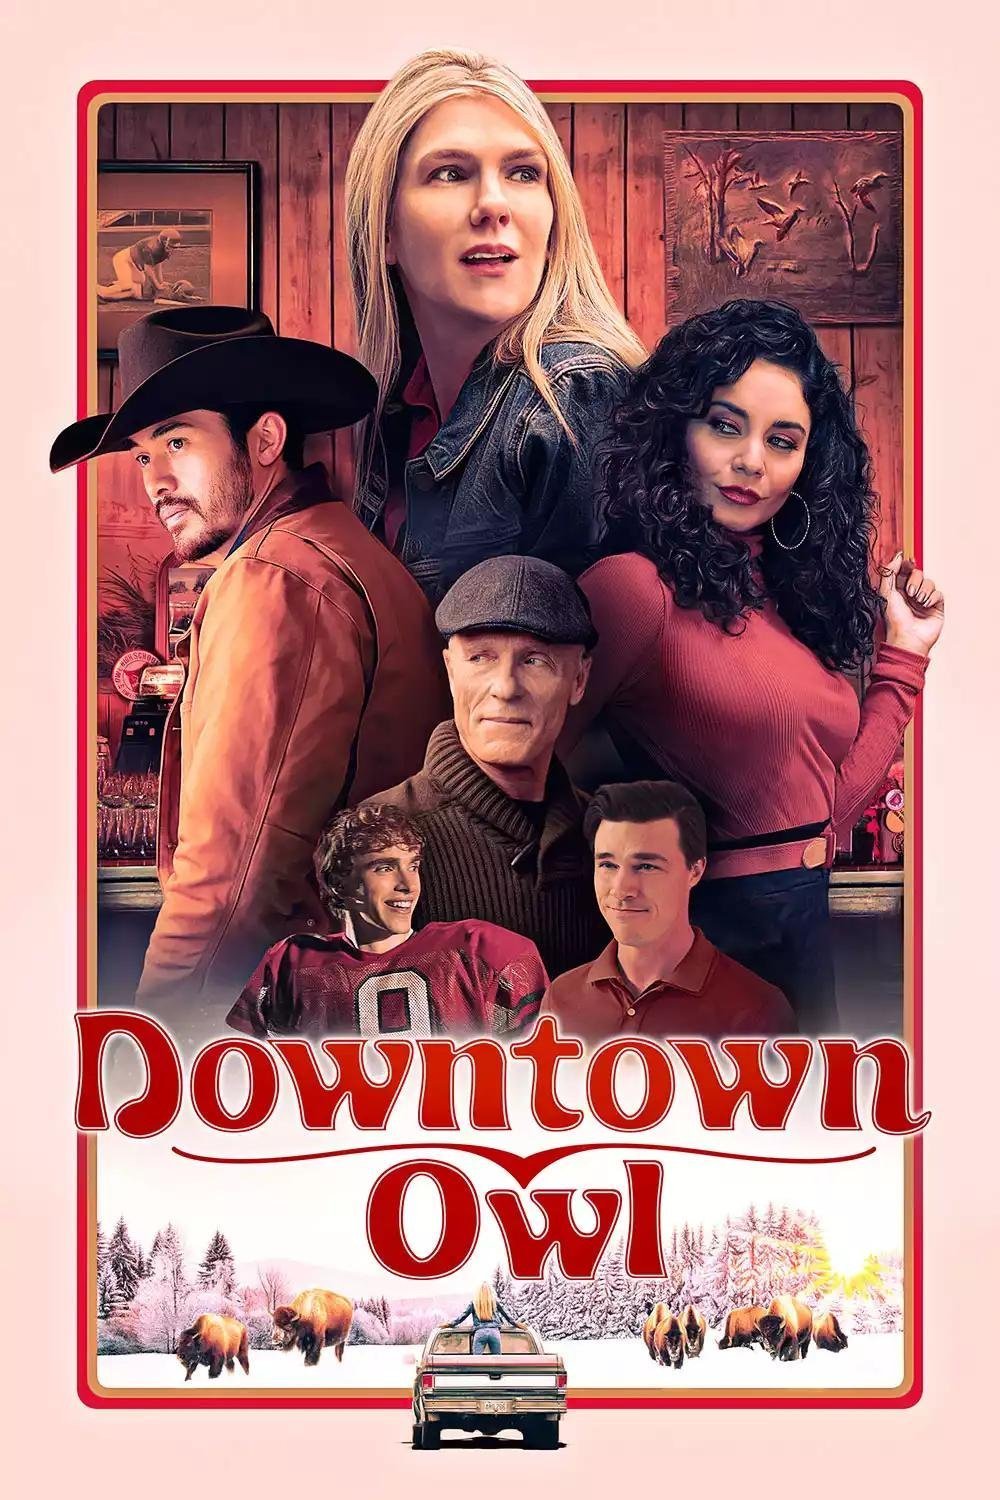 Poster of the movie Downtown Owl